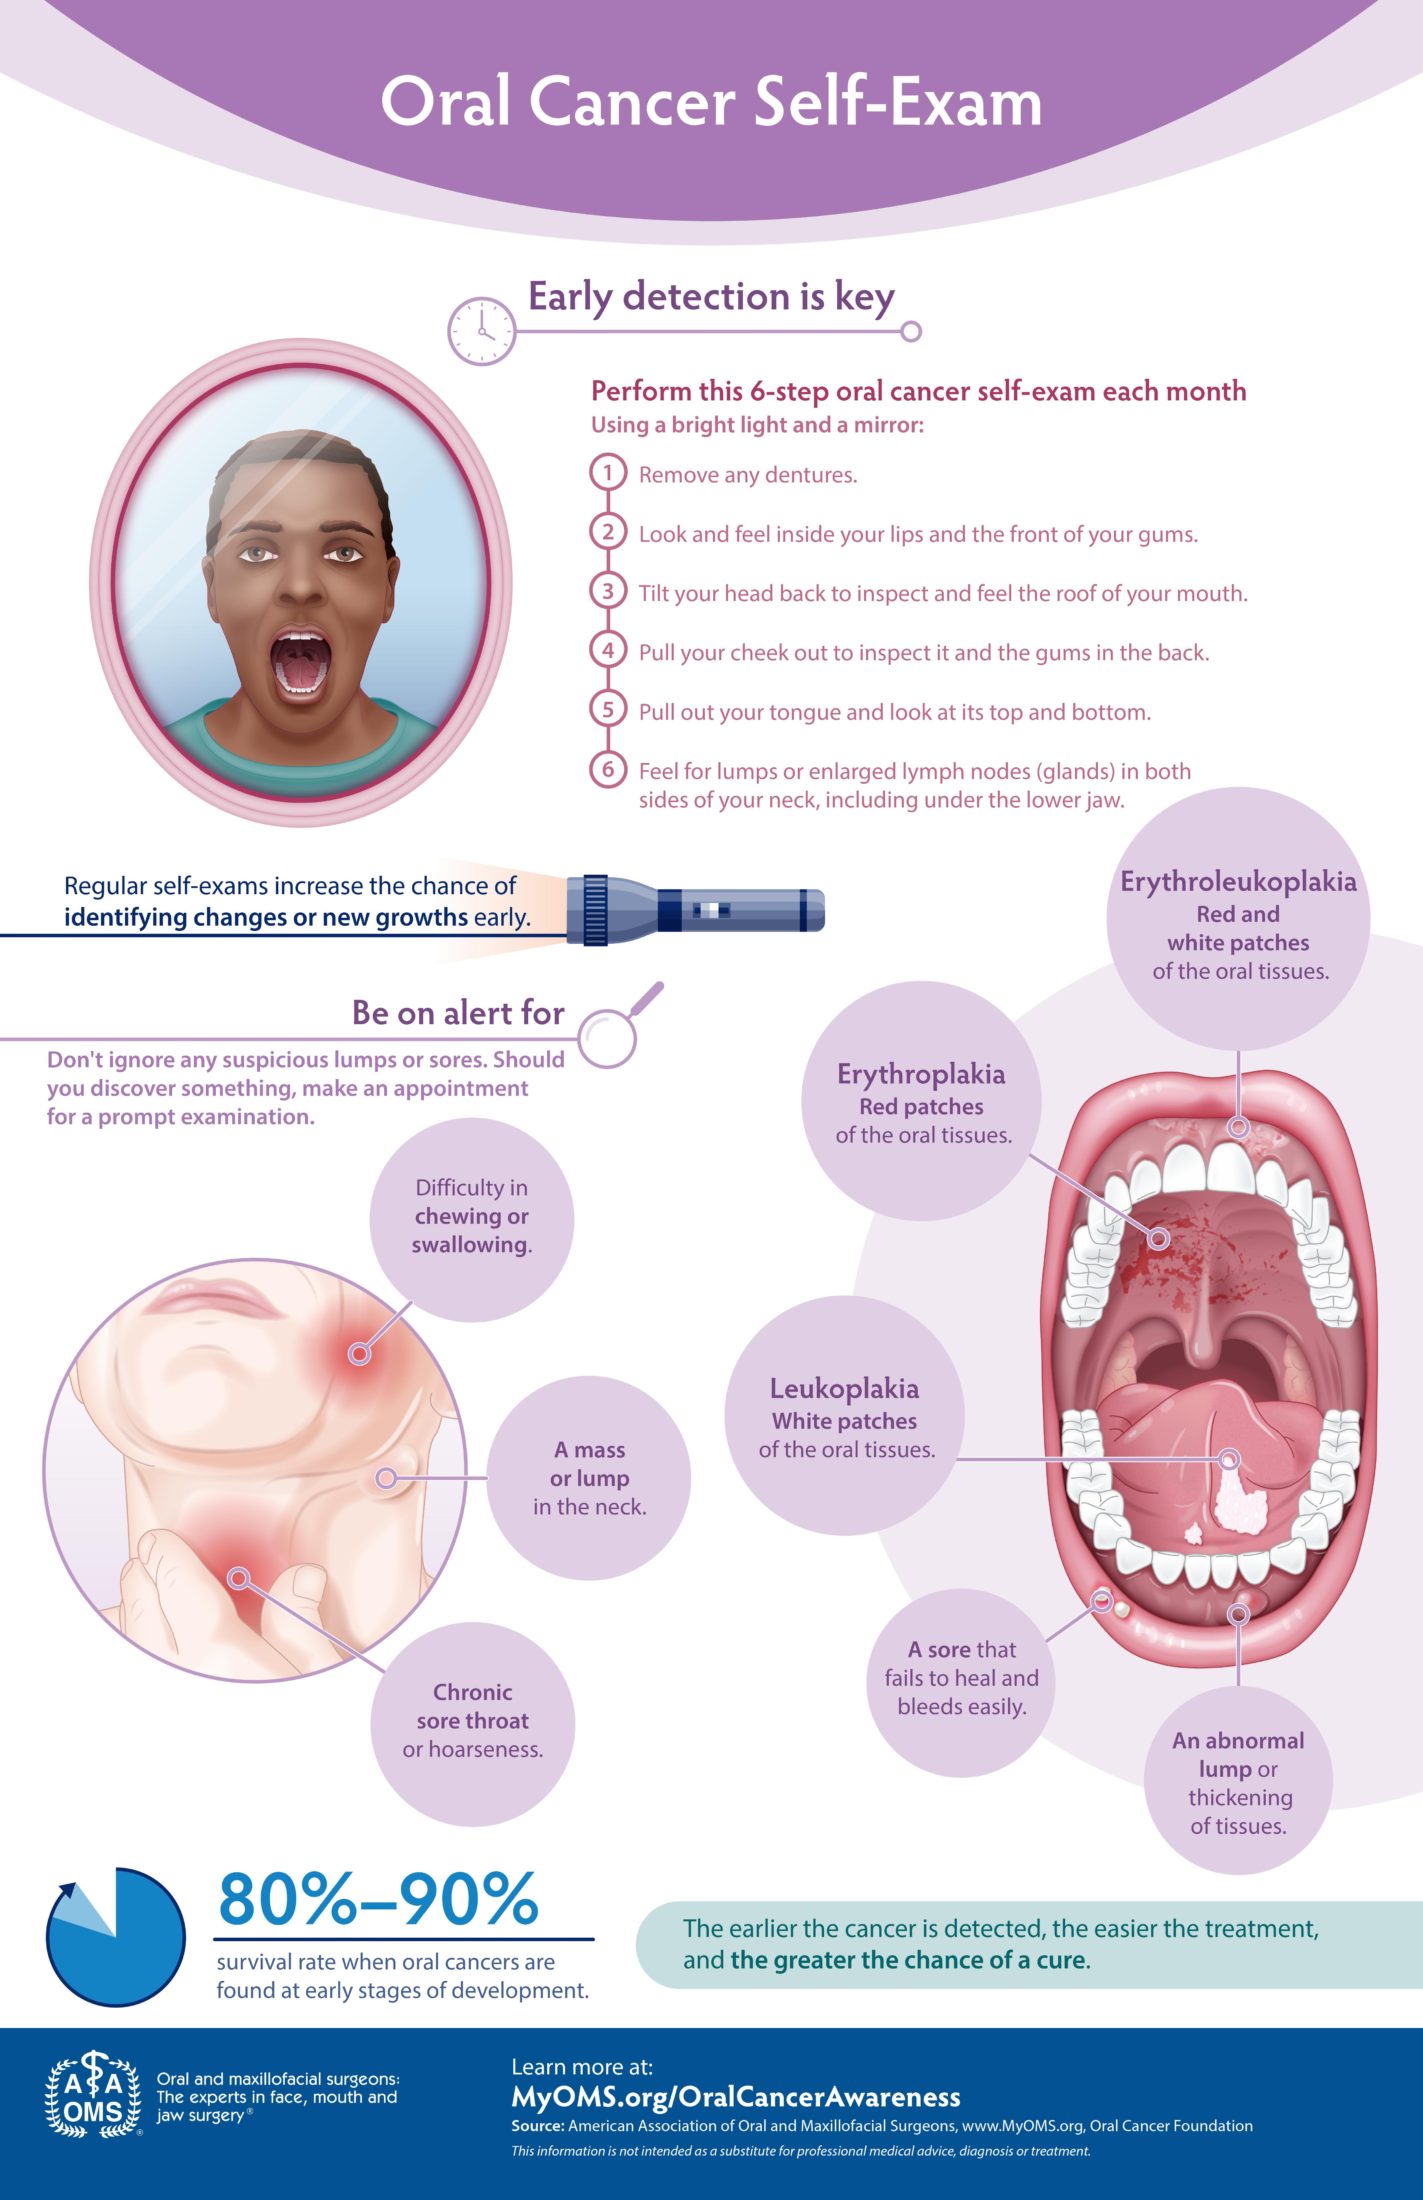 Oral Cancer Self-exam Infographic